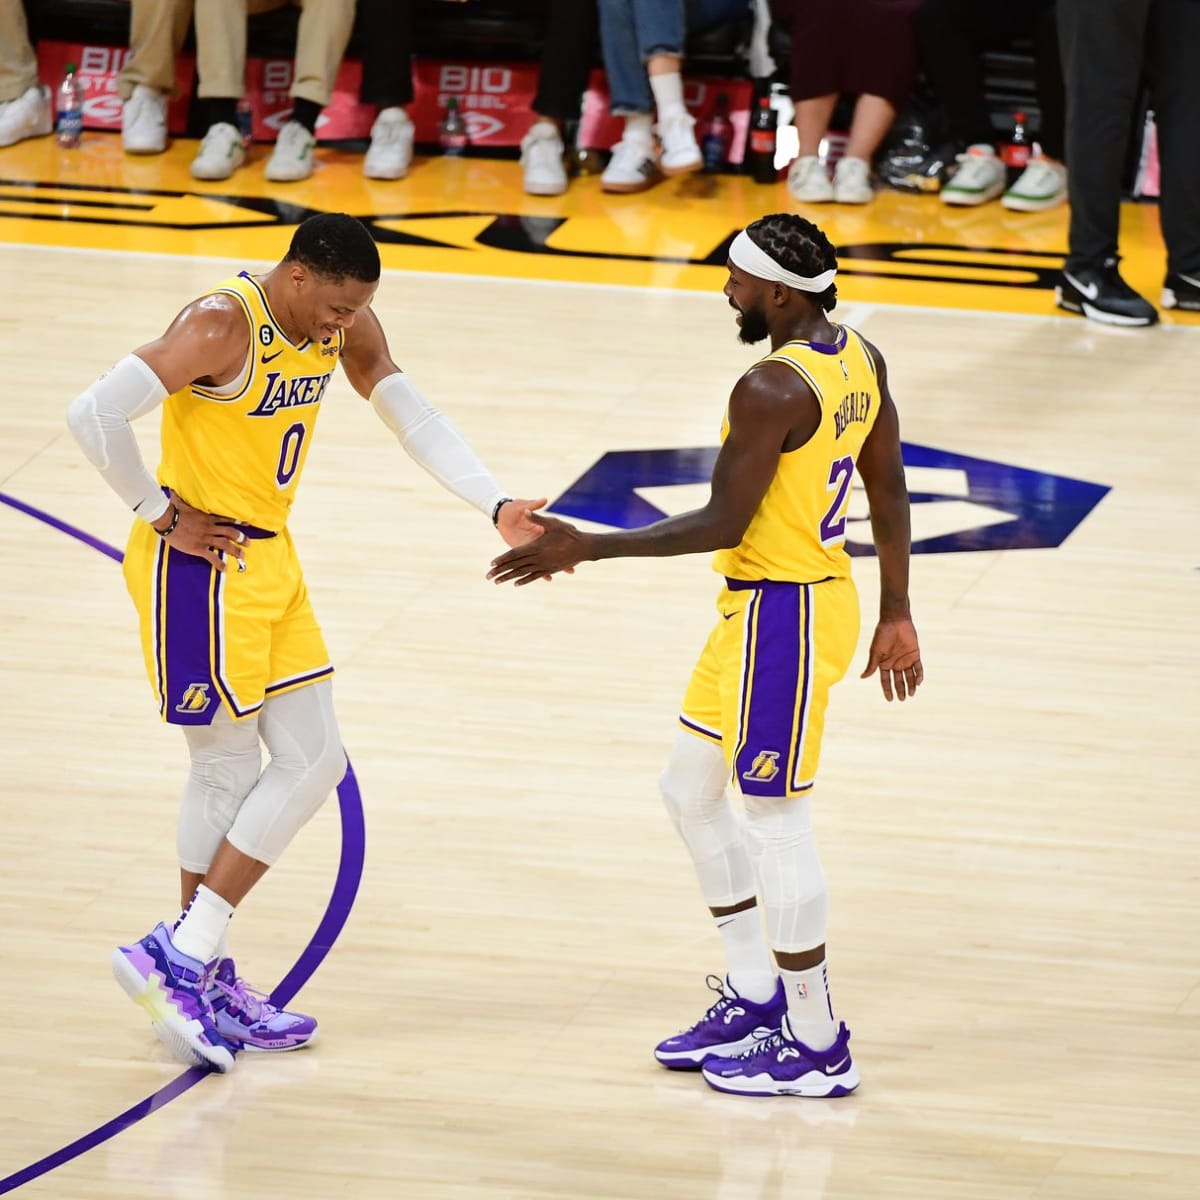 Should Russell Westbrook and Patrick Beverley get rings if Lakers